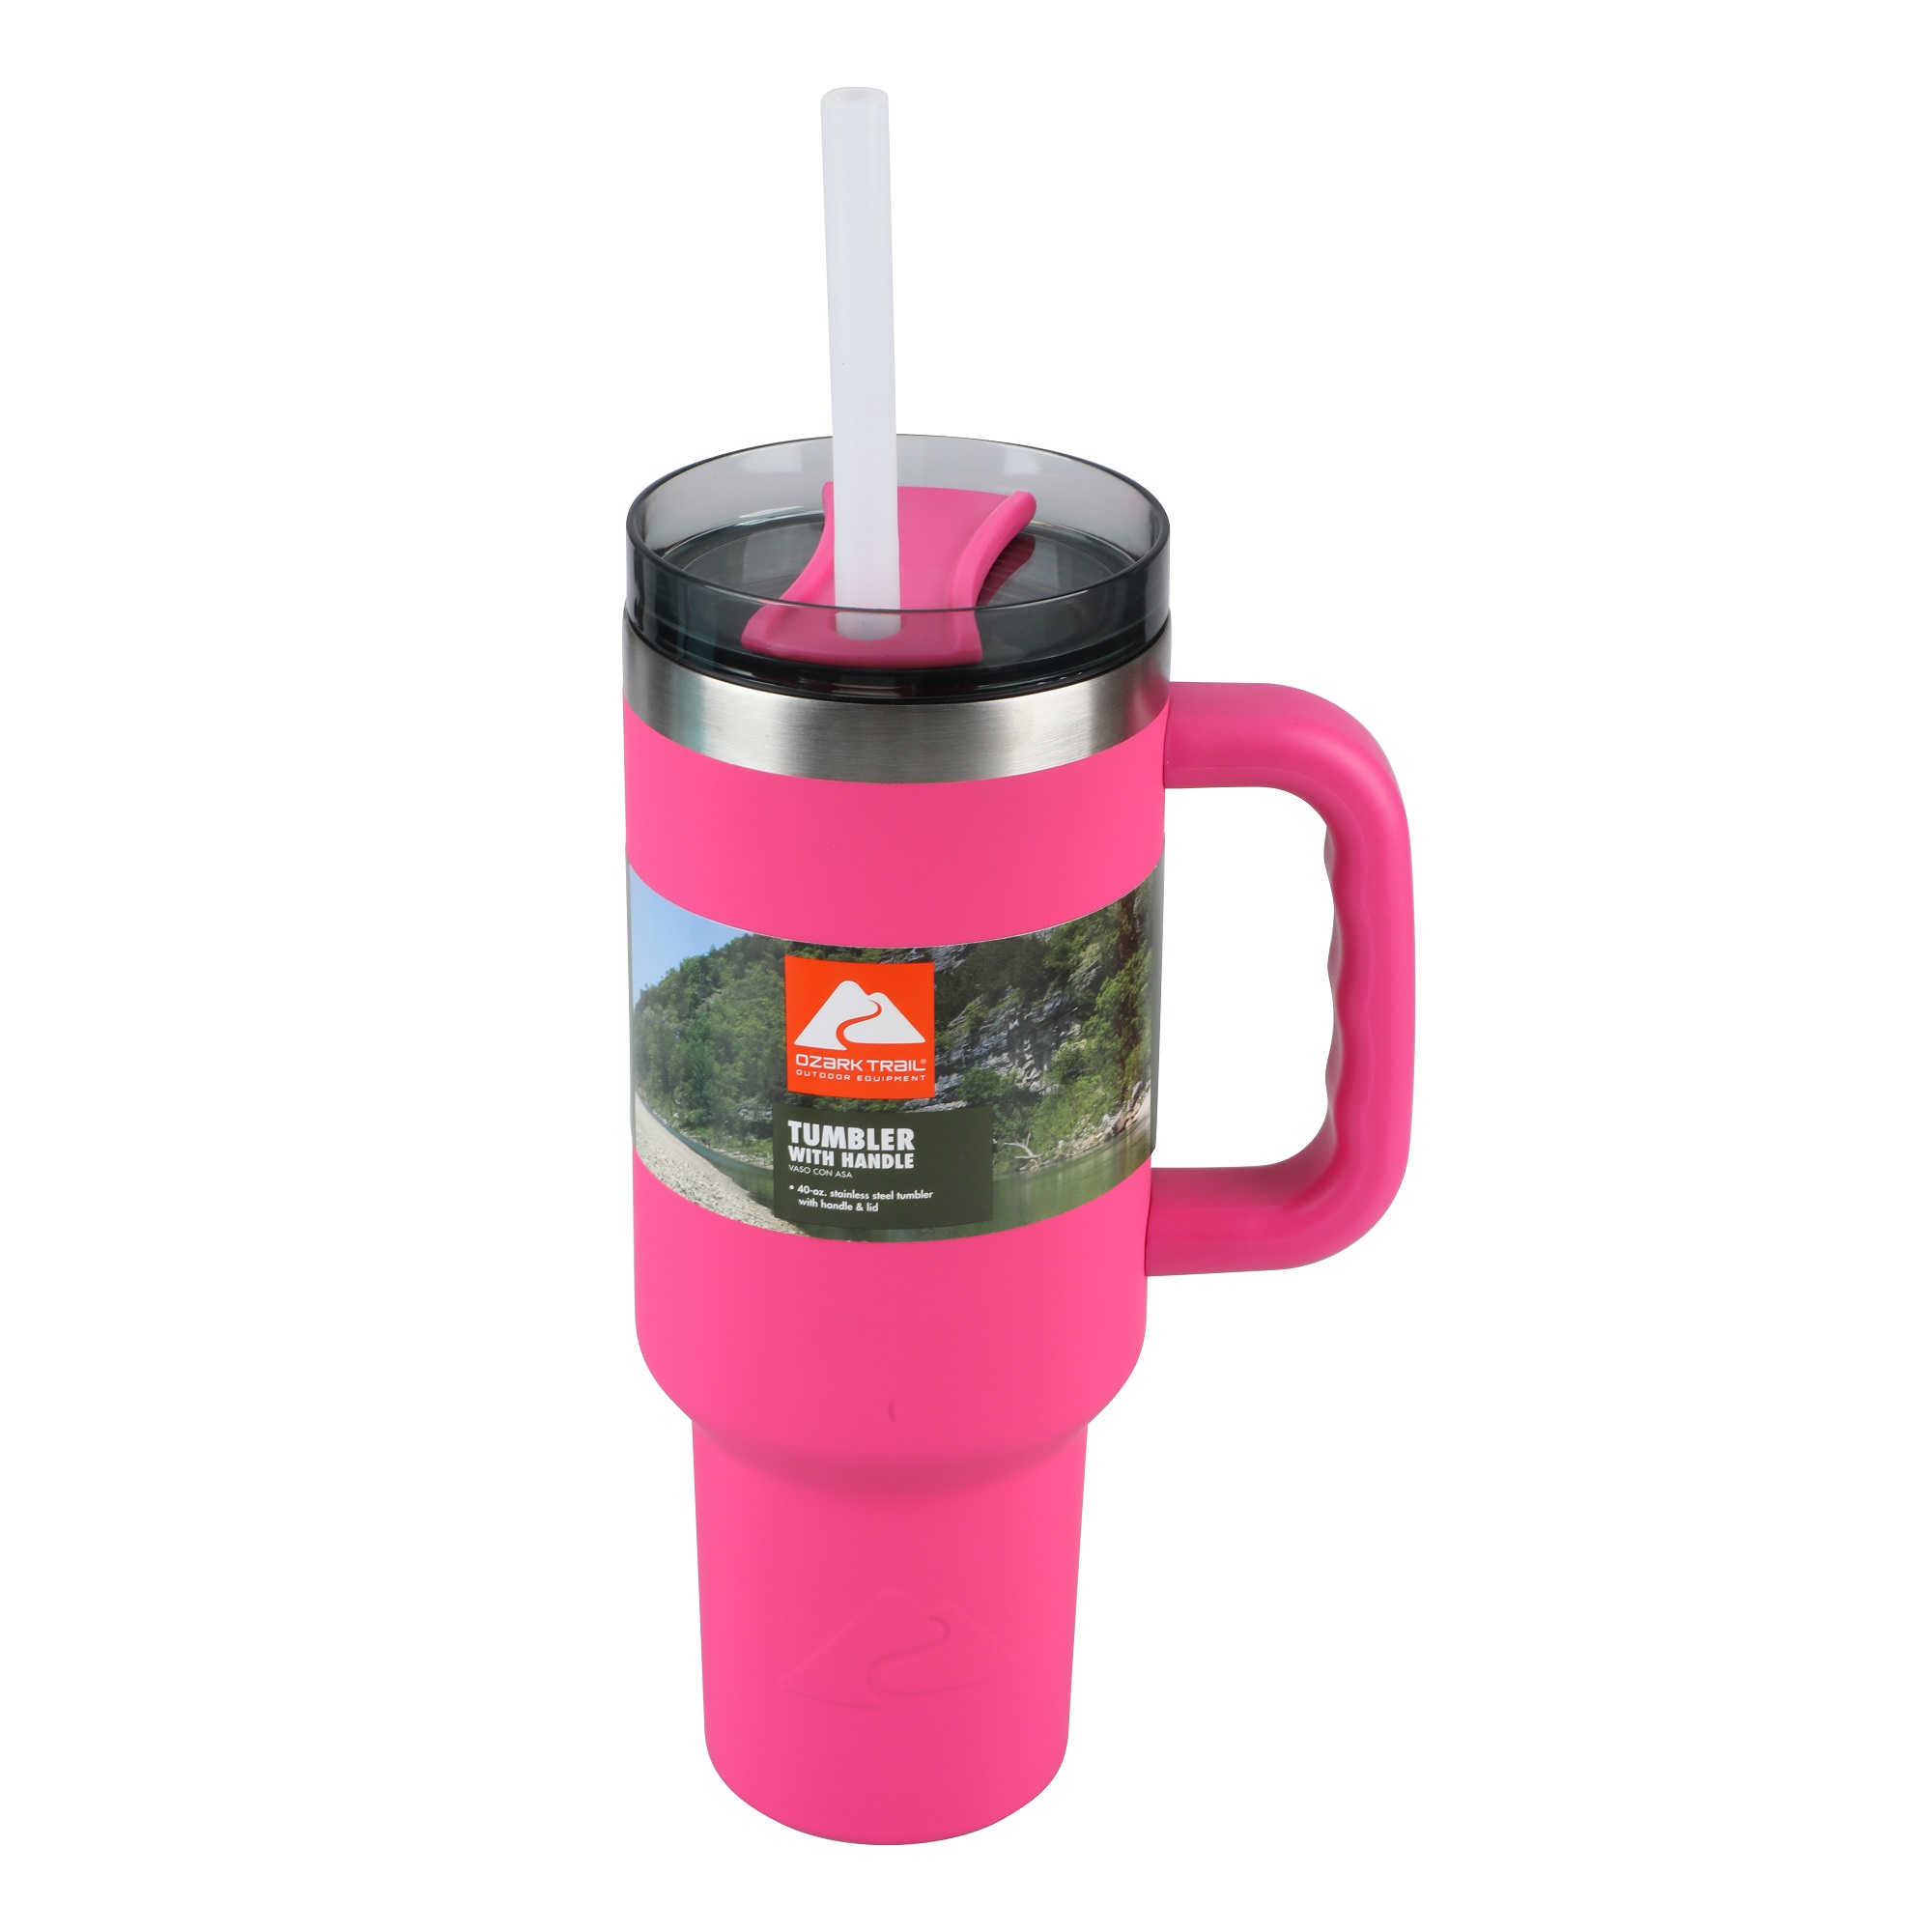 Ozark Trail 40 oz Vacuum Insulated Stainless Steel Tumbler Hot Pink - image 1 of 9